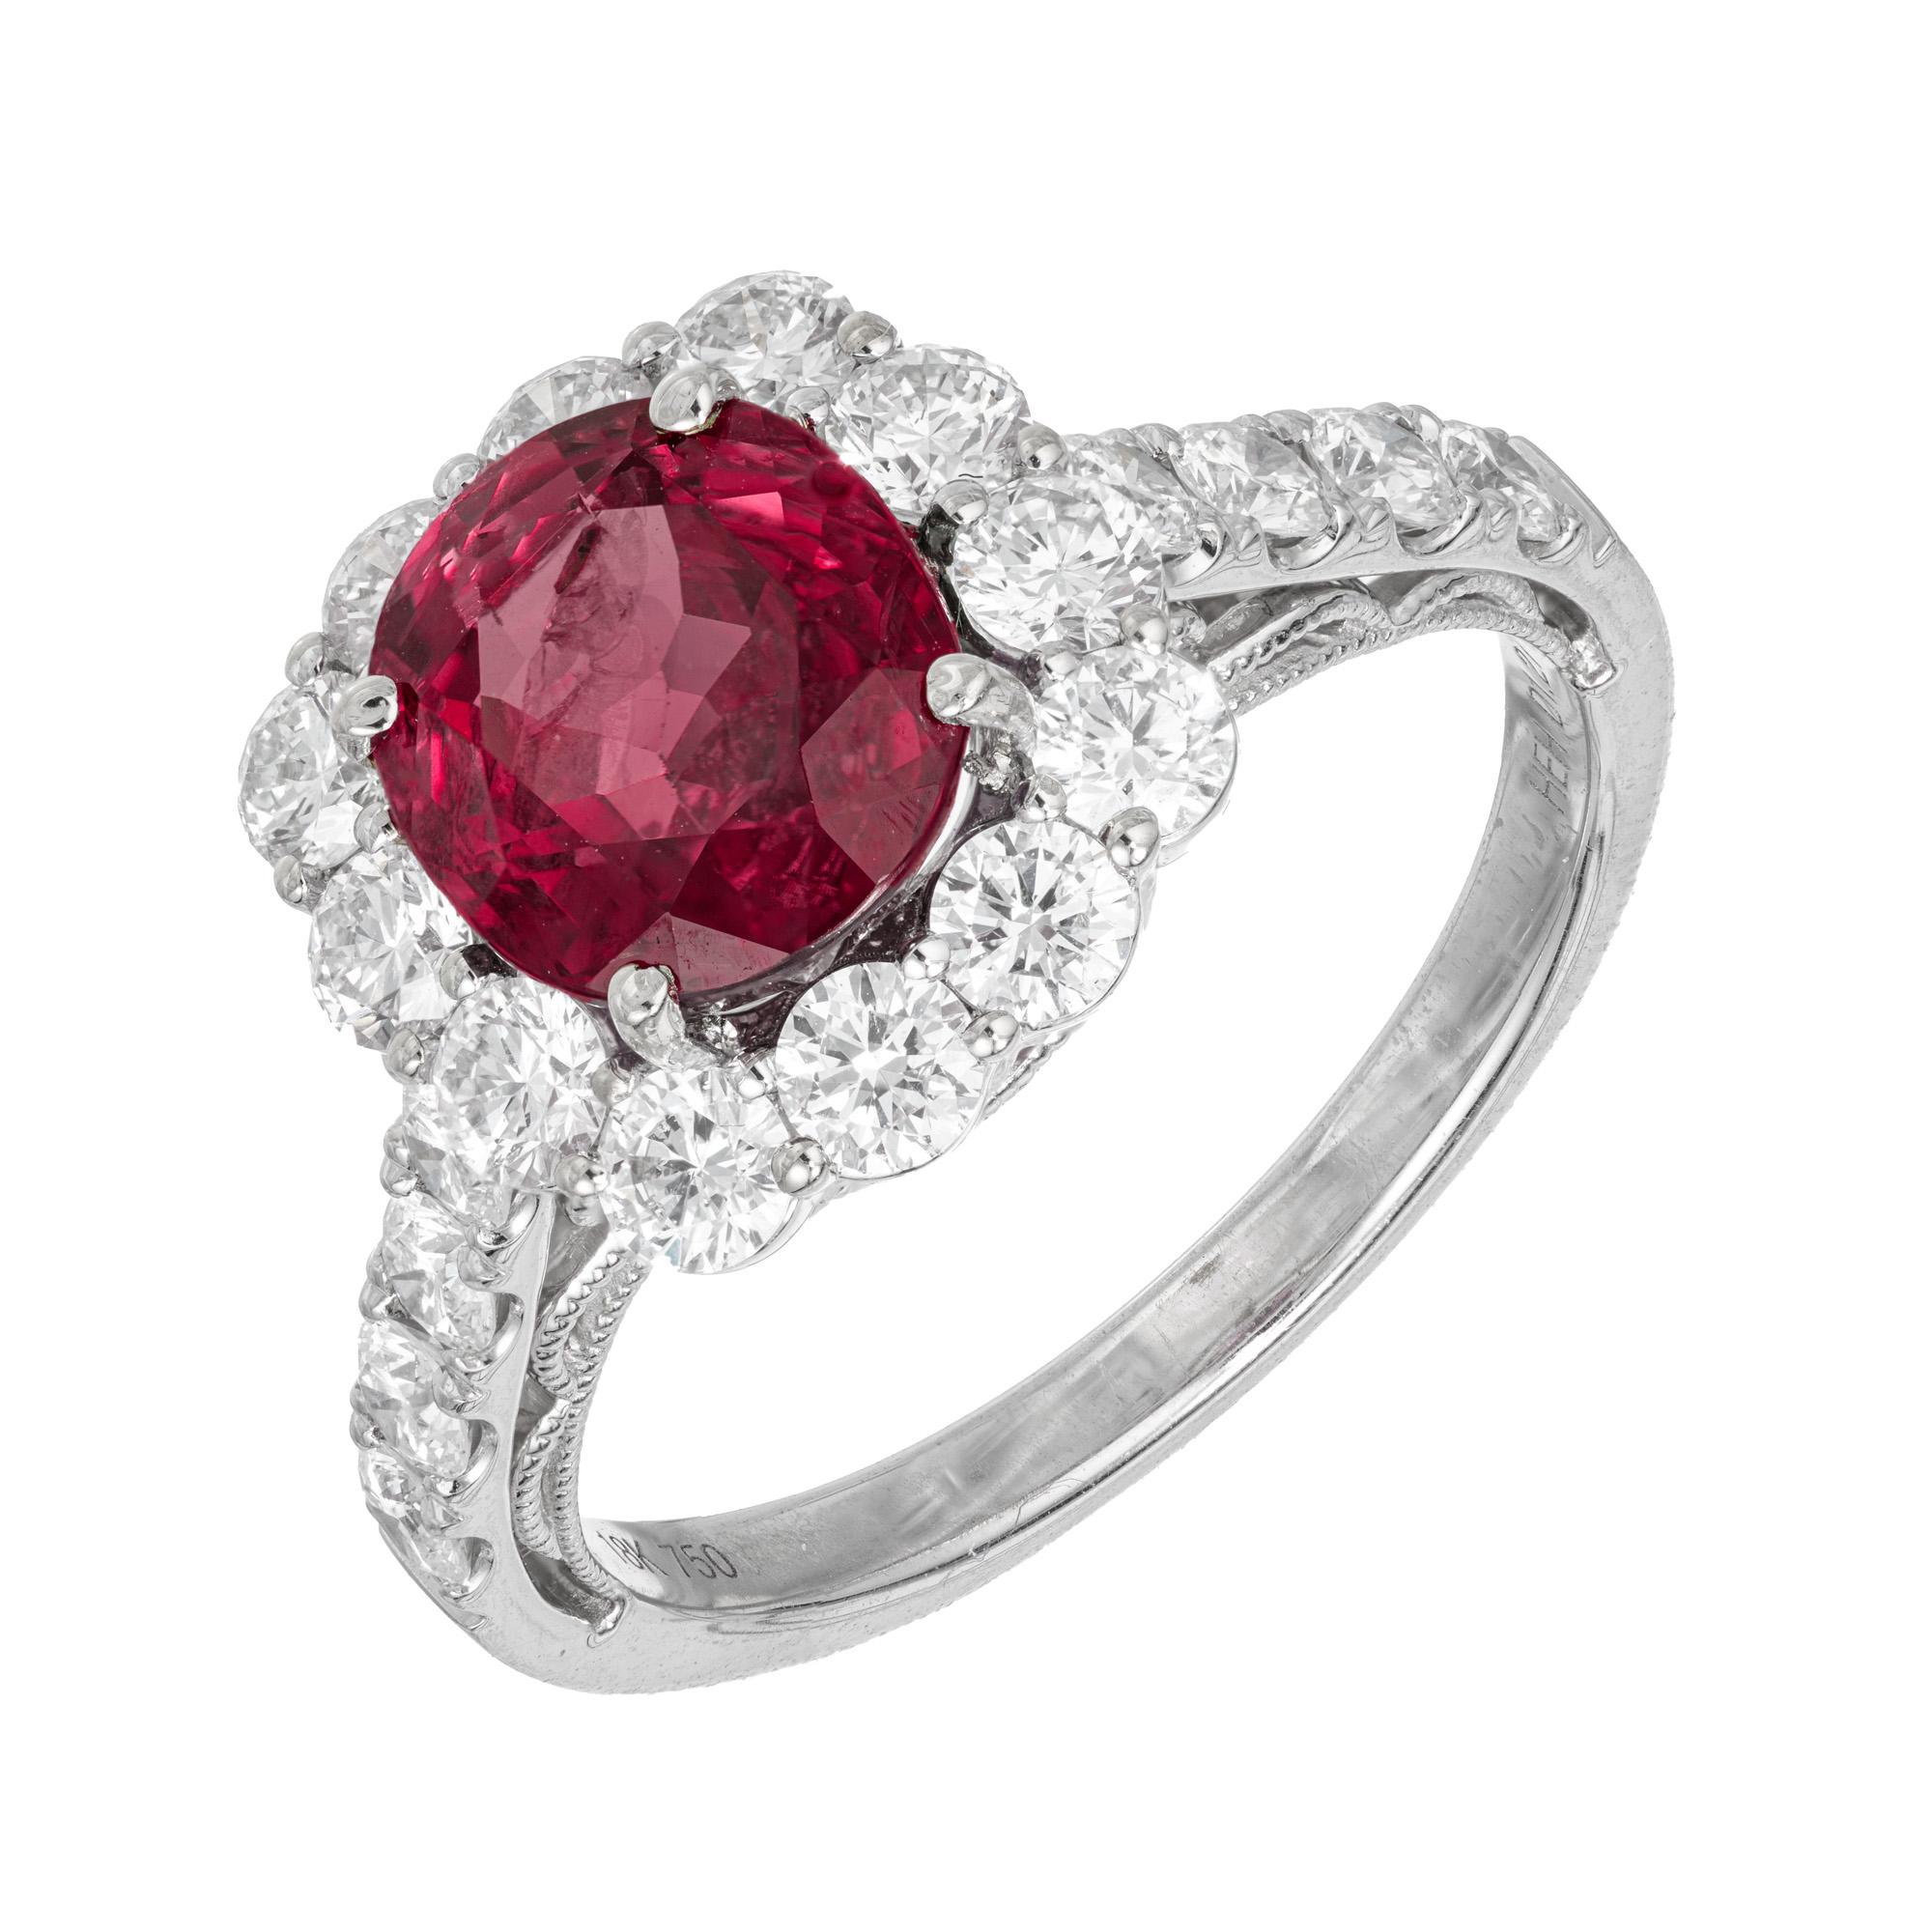 Purple red ruby and diamond engagement ring. 1935-1940's GIA certified oval 2.76cts ruby set in a 18k white gold diamond halo setting with accent diamonds along the shanks. The ring was designed and crafted in the Peter Suchy workshop

1 oval purple